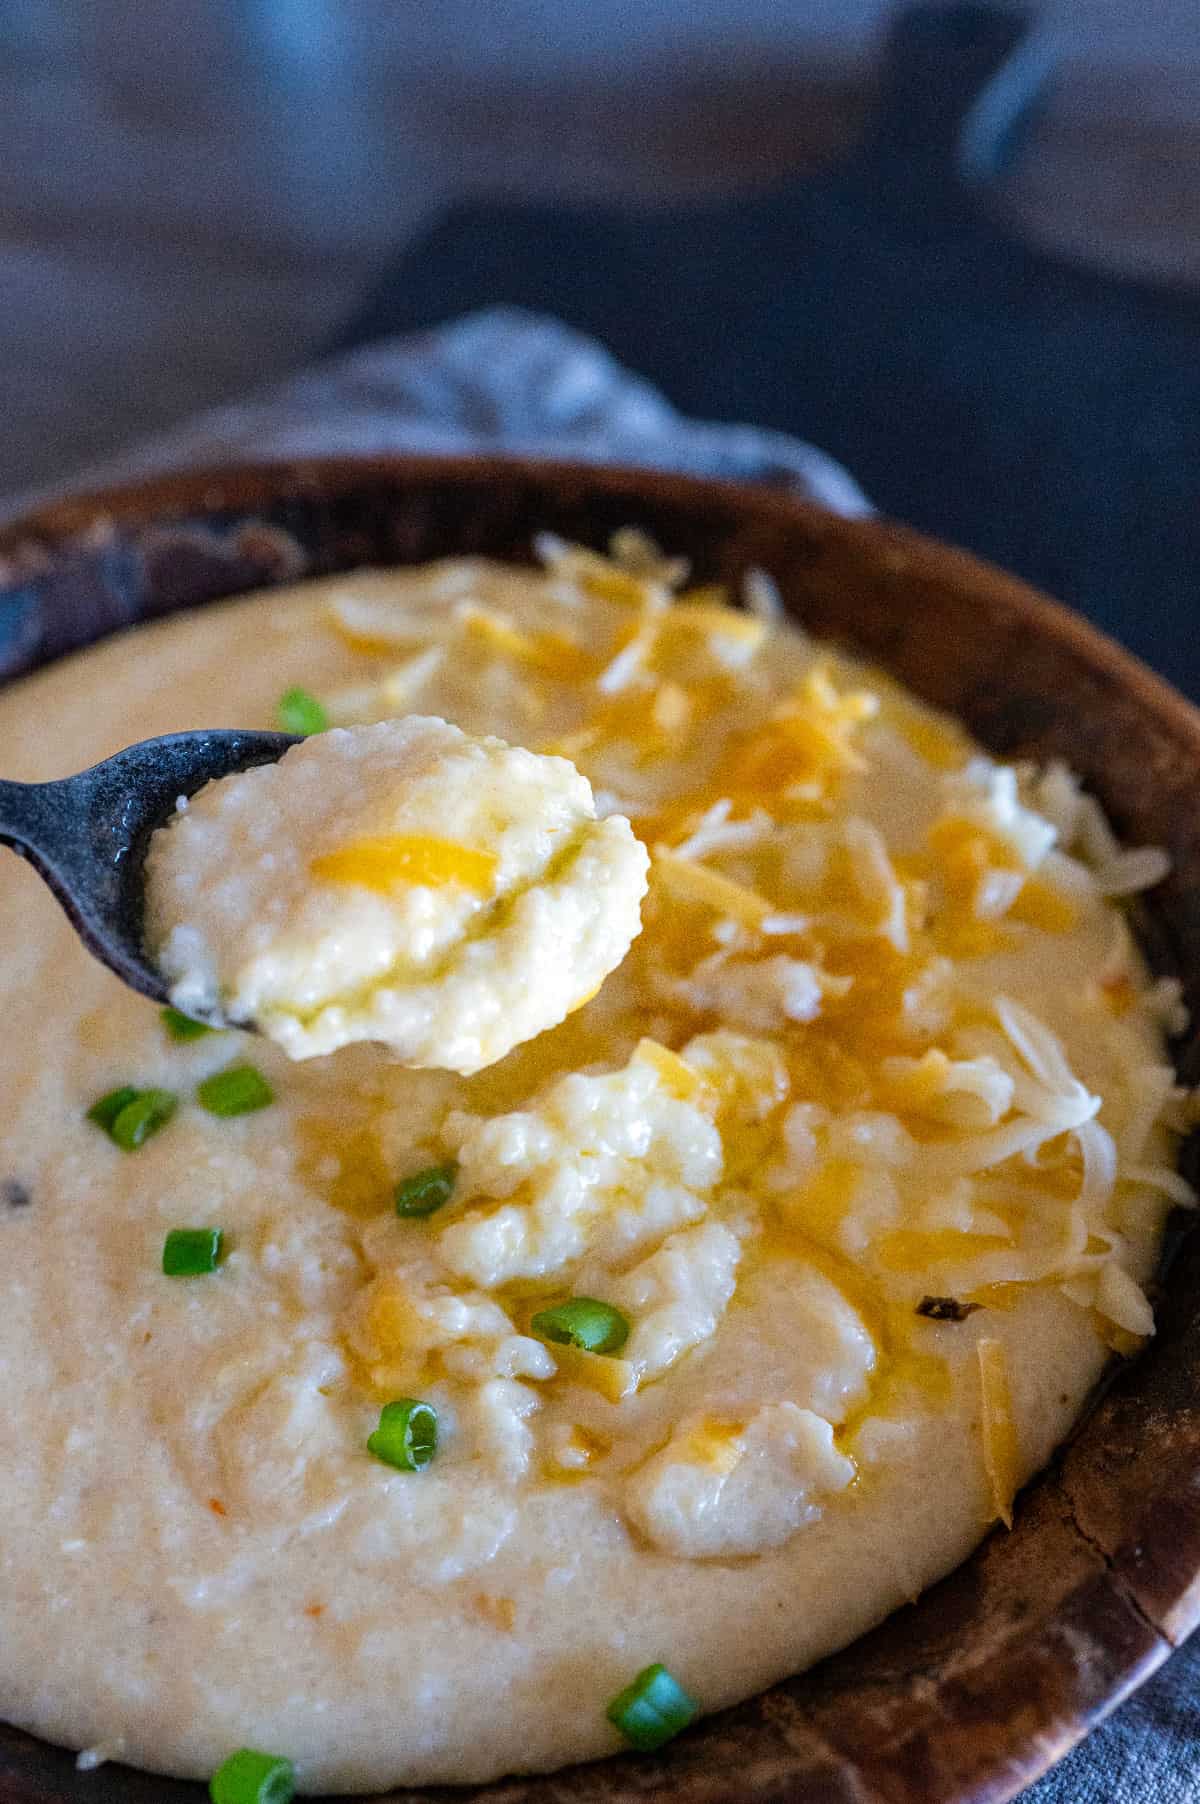 Spoonful of cheese grits.